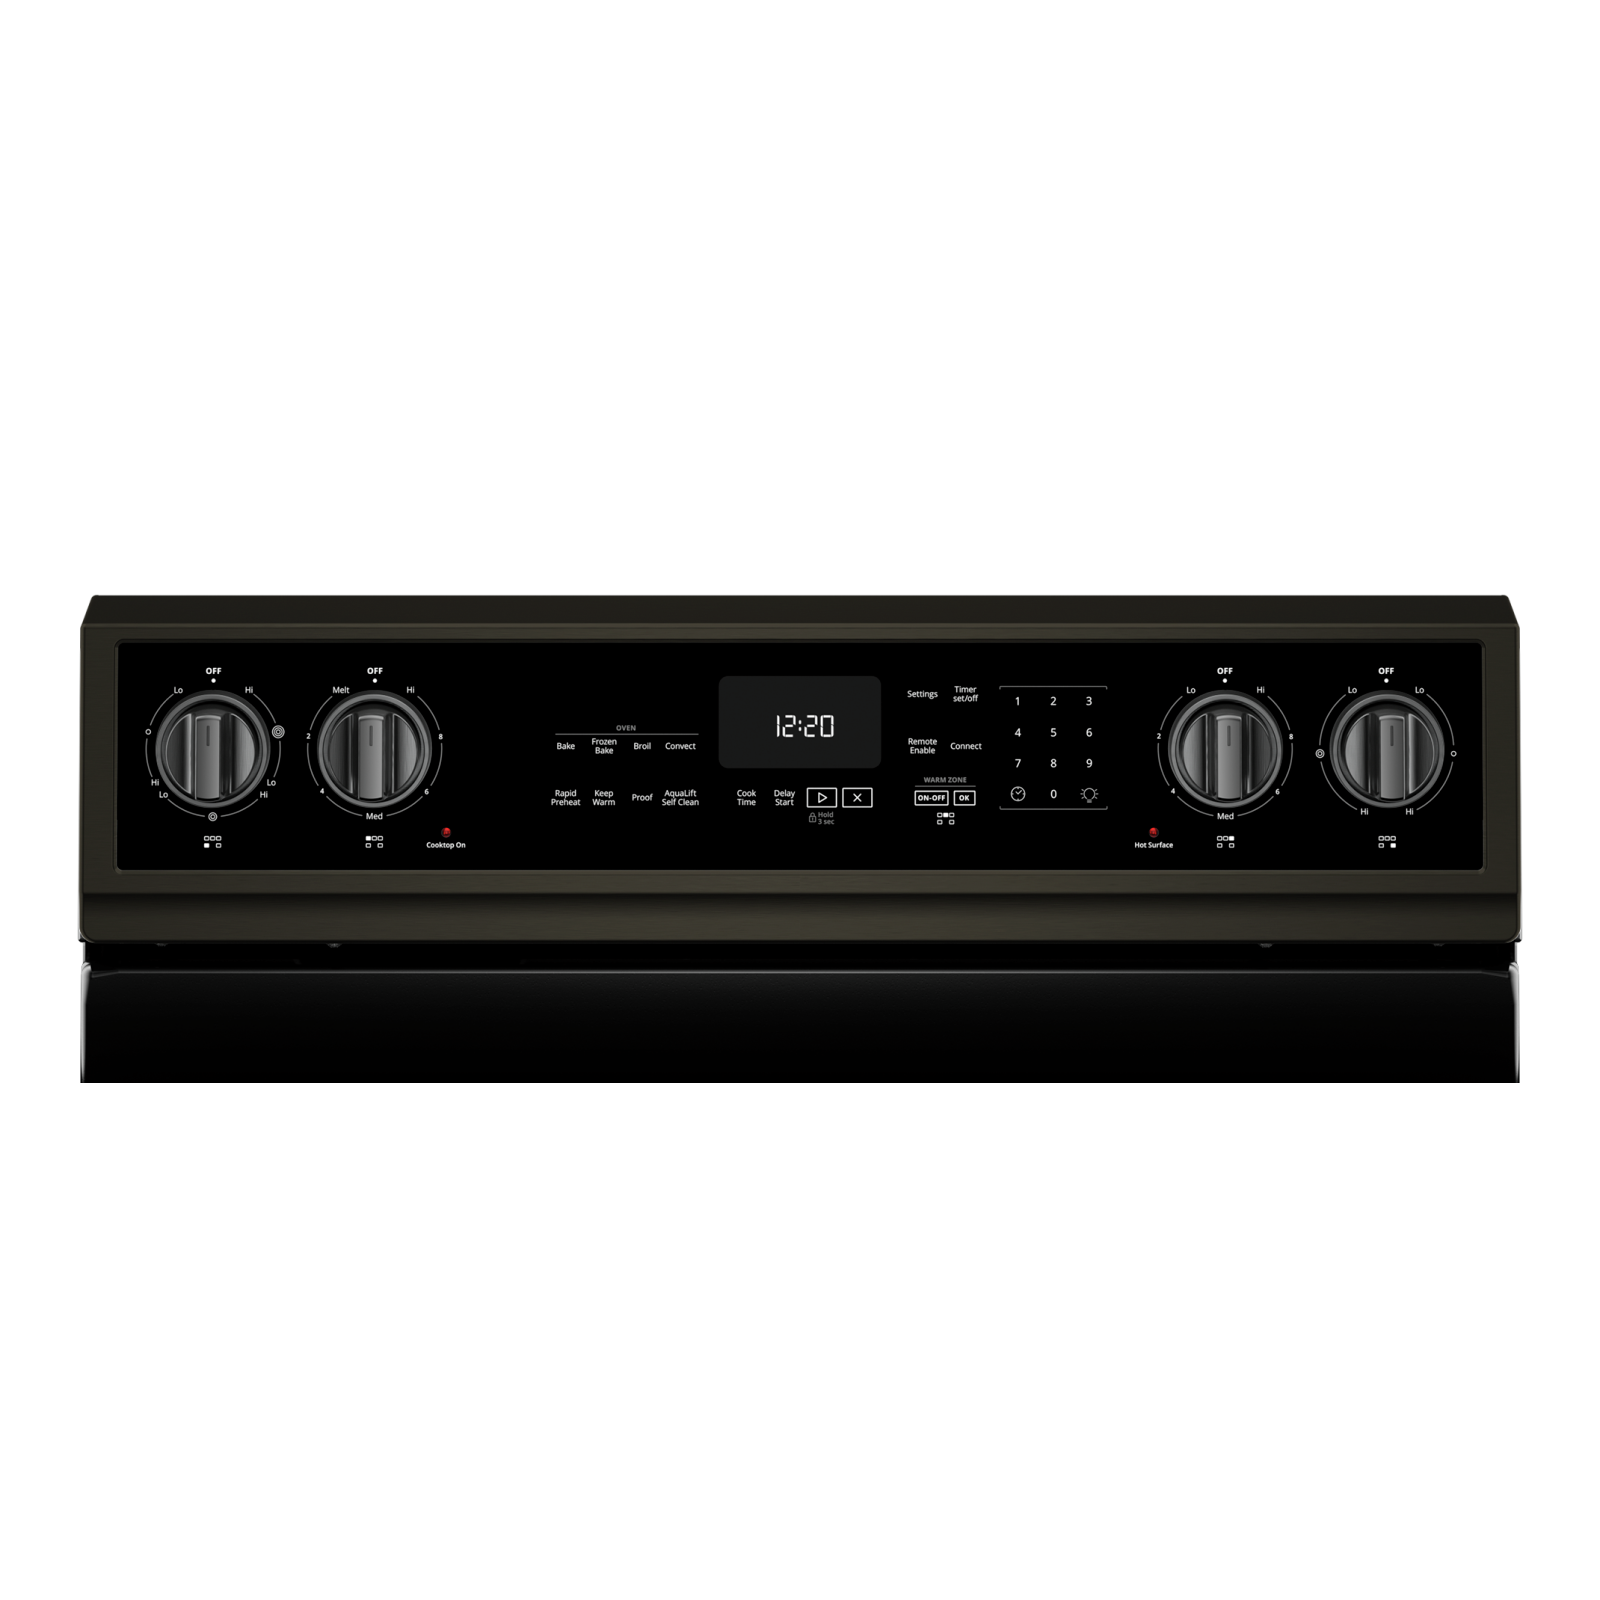 Whirlpool - 6.4 cu. ft  Electric Range in Black Stainless - YWFE975H0HV